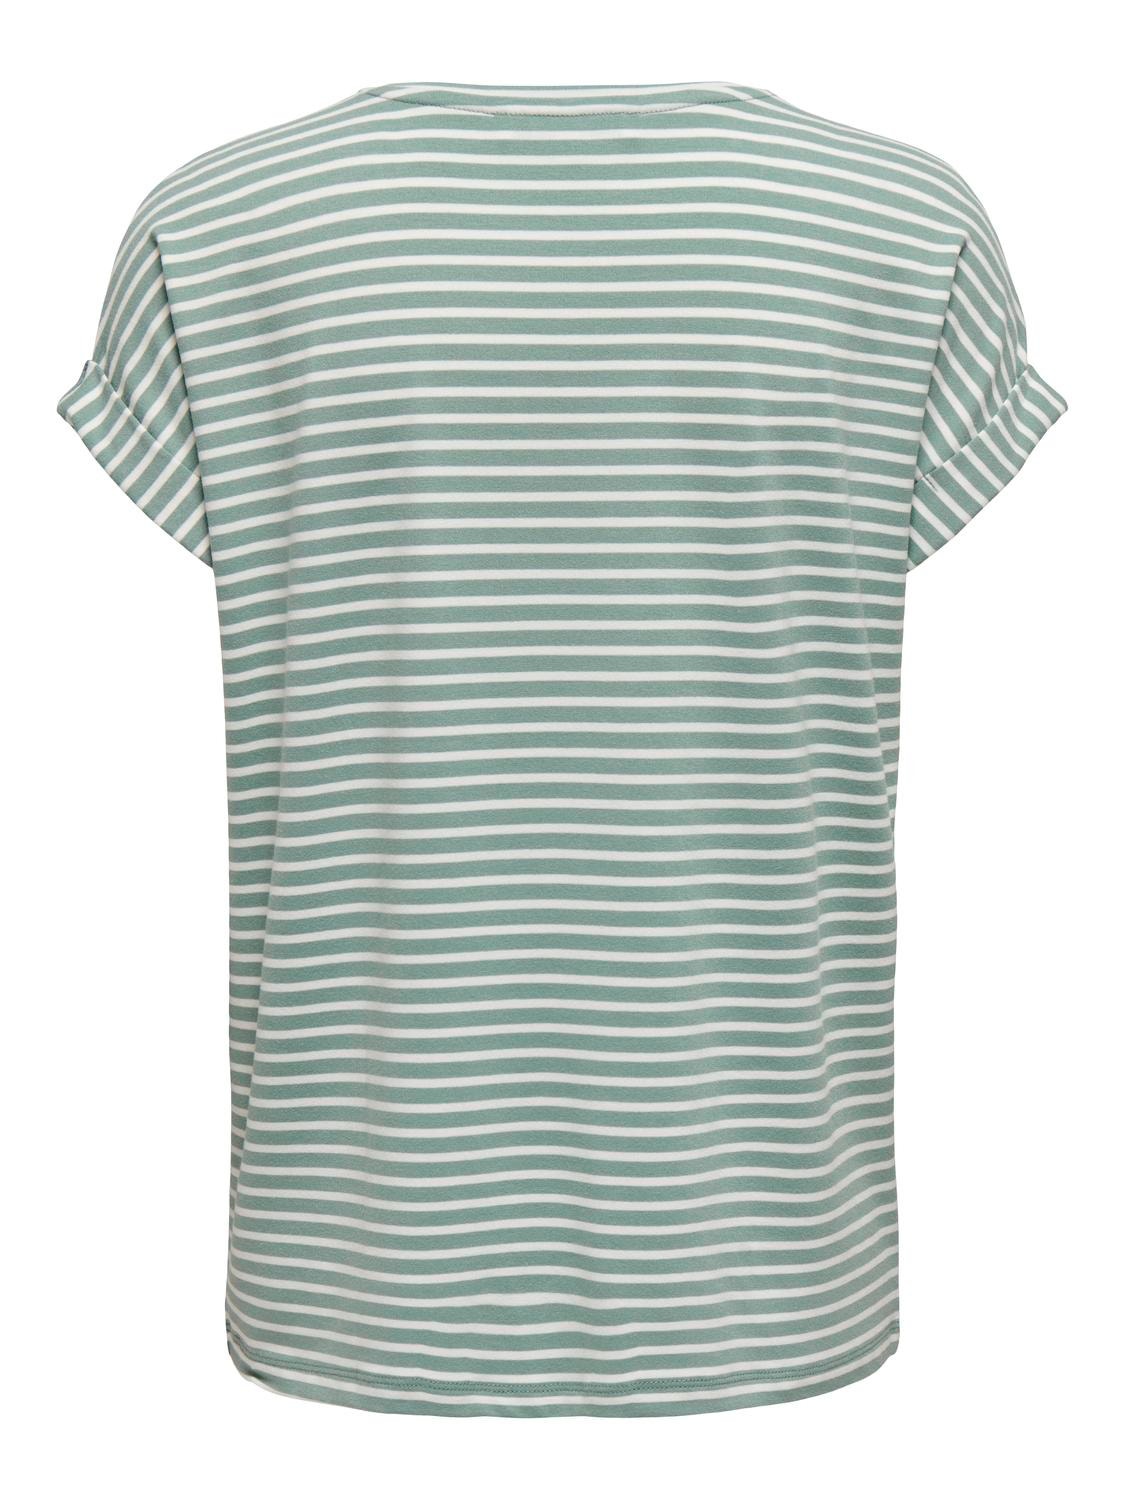 ONLY Regular Fit Round Neck Dropped shoulders T-Shirt -Jadeite - 15206243